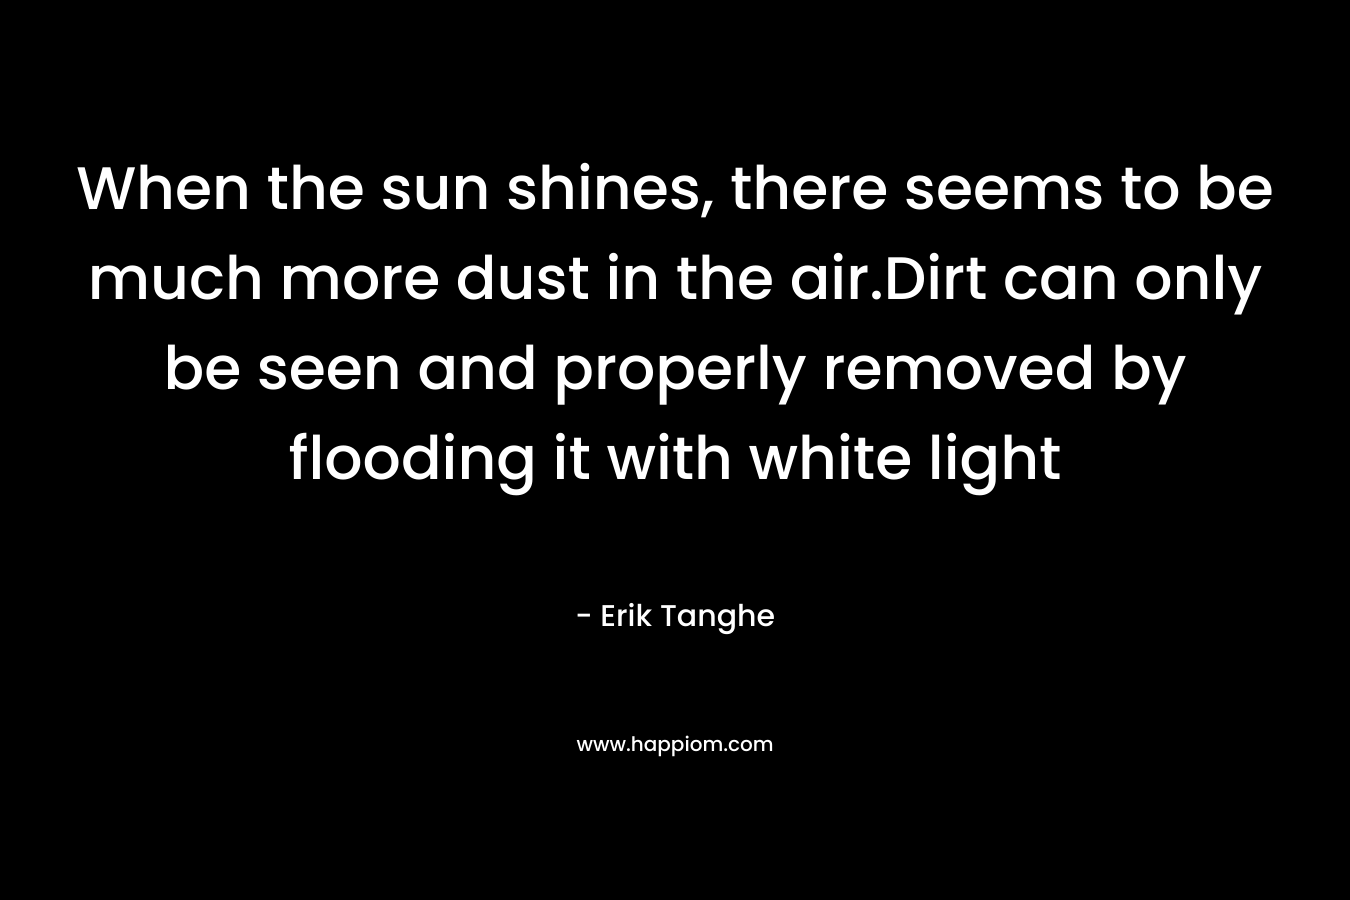 When the sun shines, there seems to be much more dust in the air.Dirt can only be seen and properly removed by flooding it with white light